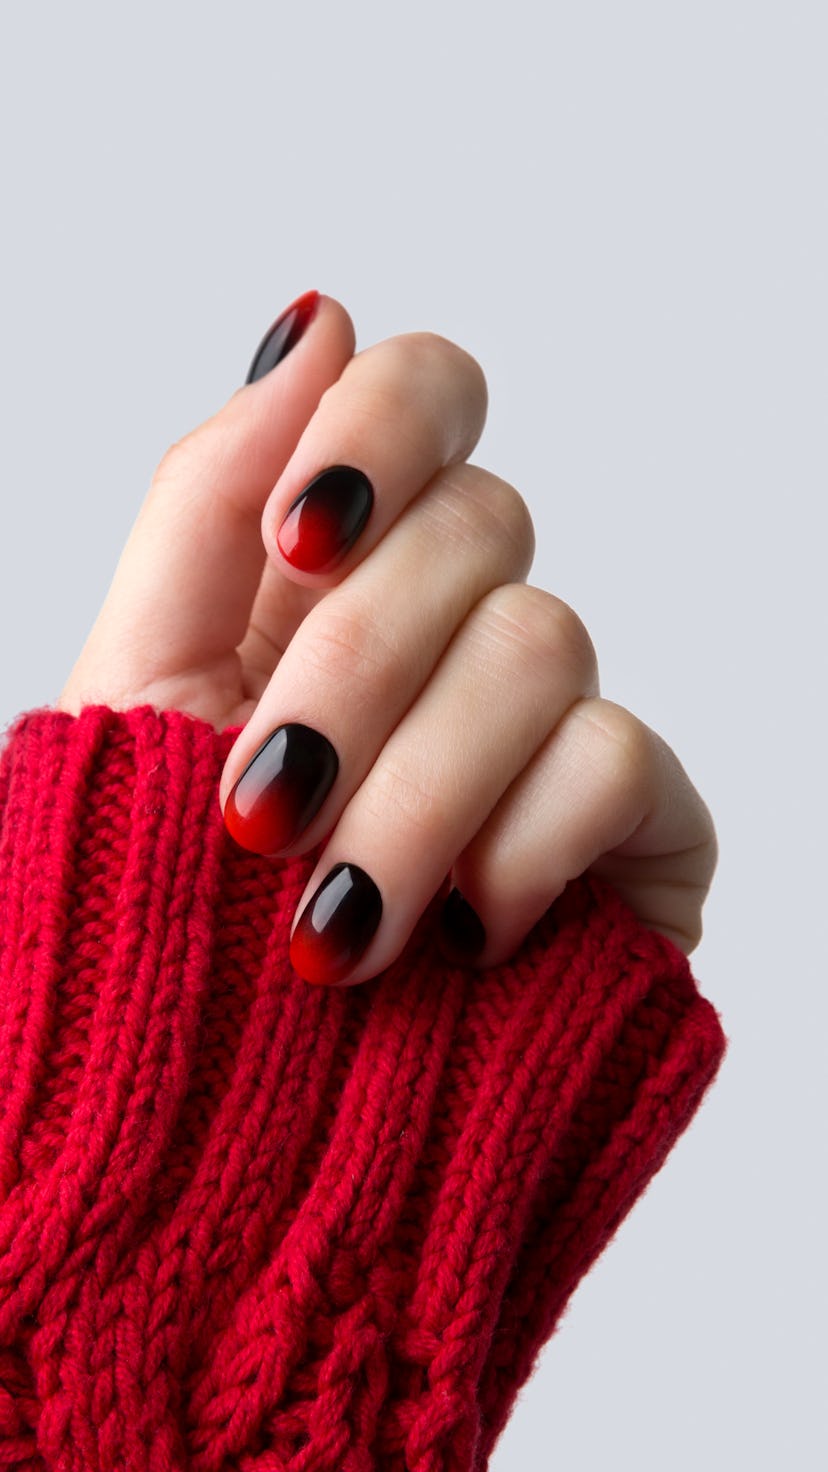 Female hand with red black ombre gradient nails in sweater. Trendy winter manicure concept.